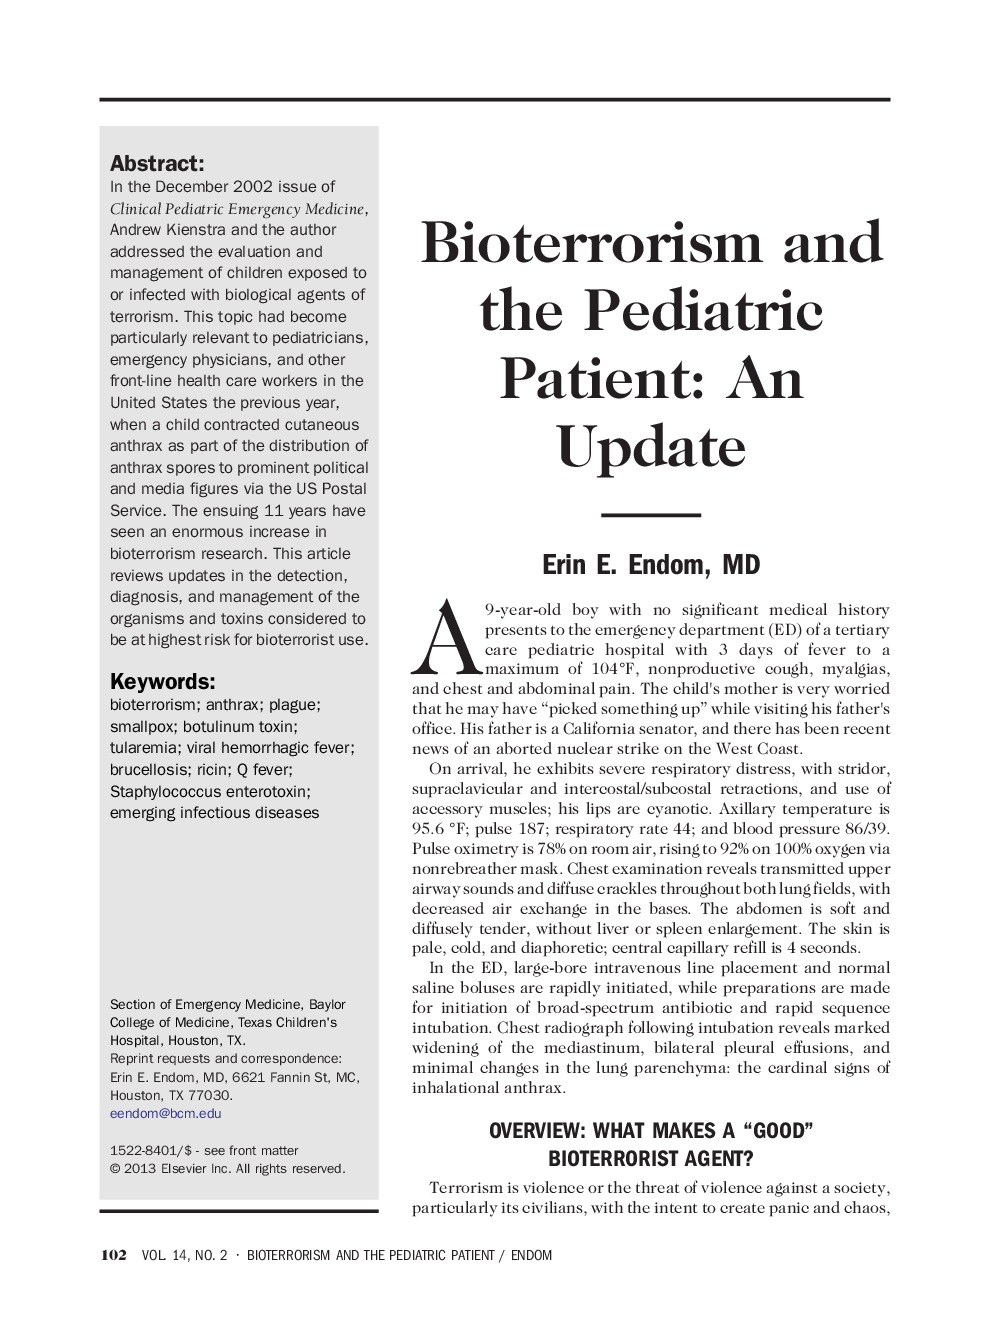 Bioterrorism and the Pediatric Patient: An Update